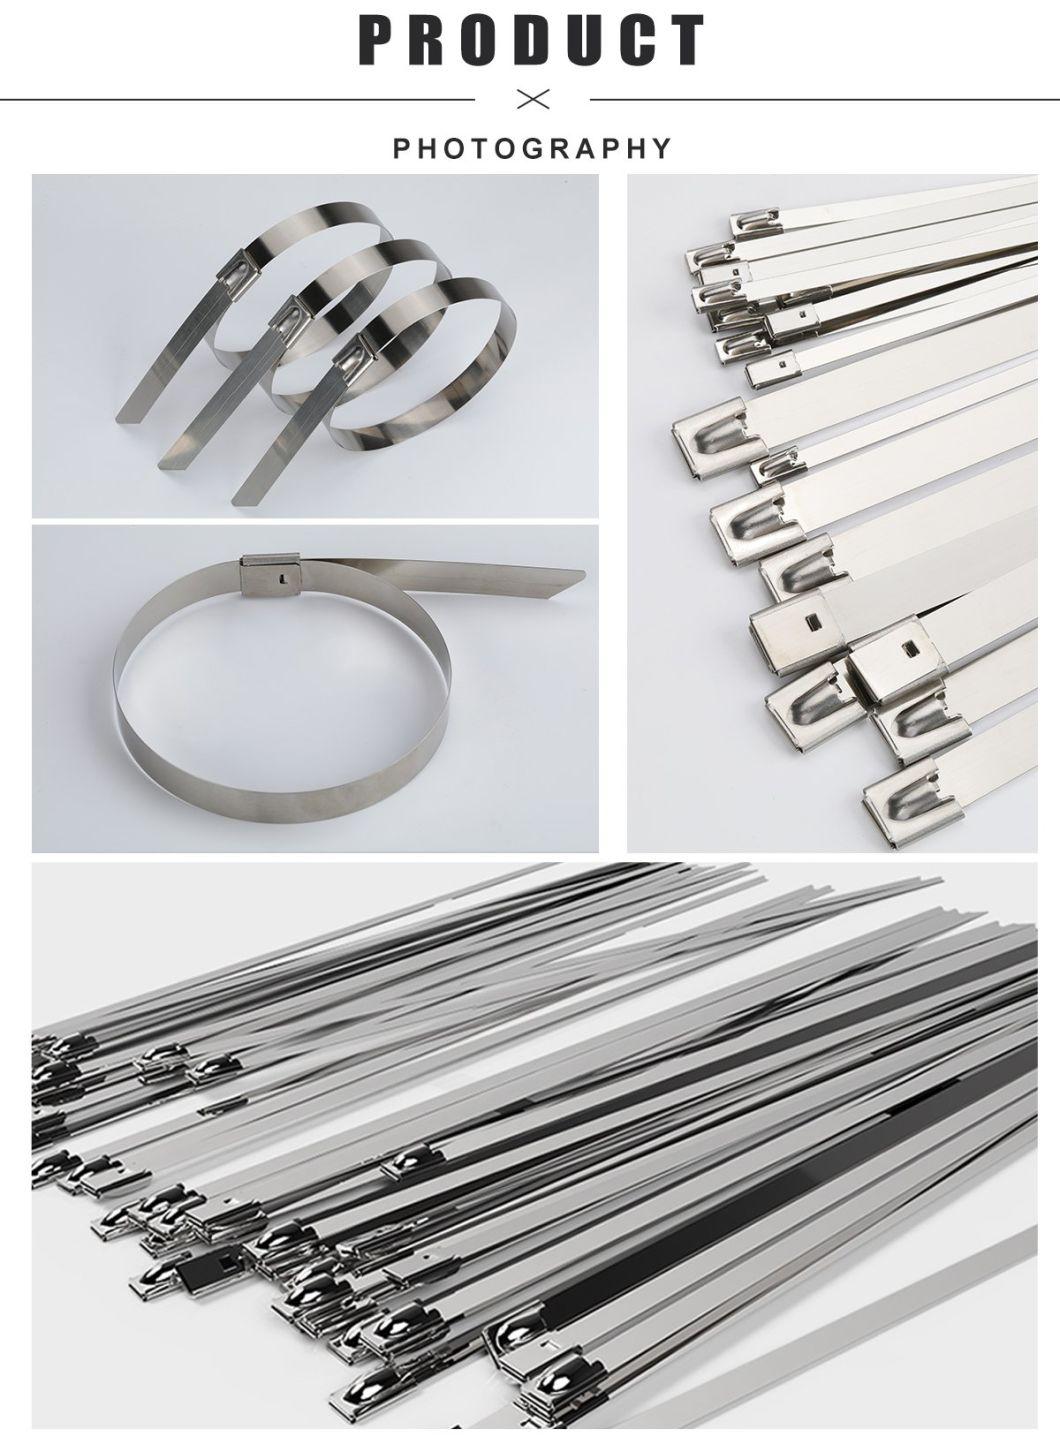 4.6X300 316 Stainless Steel Cable Ties